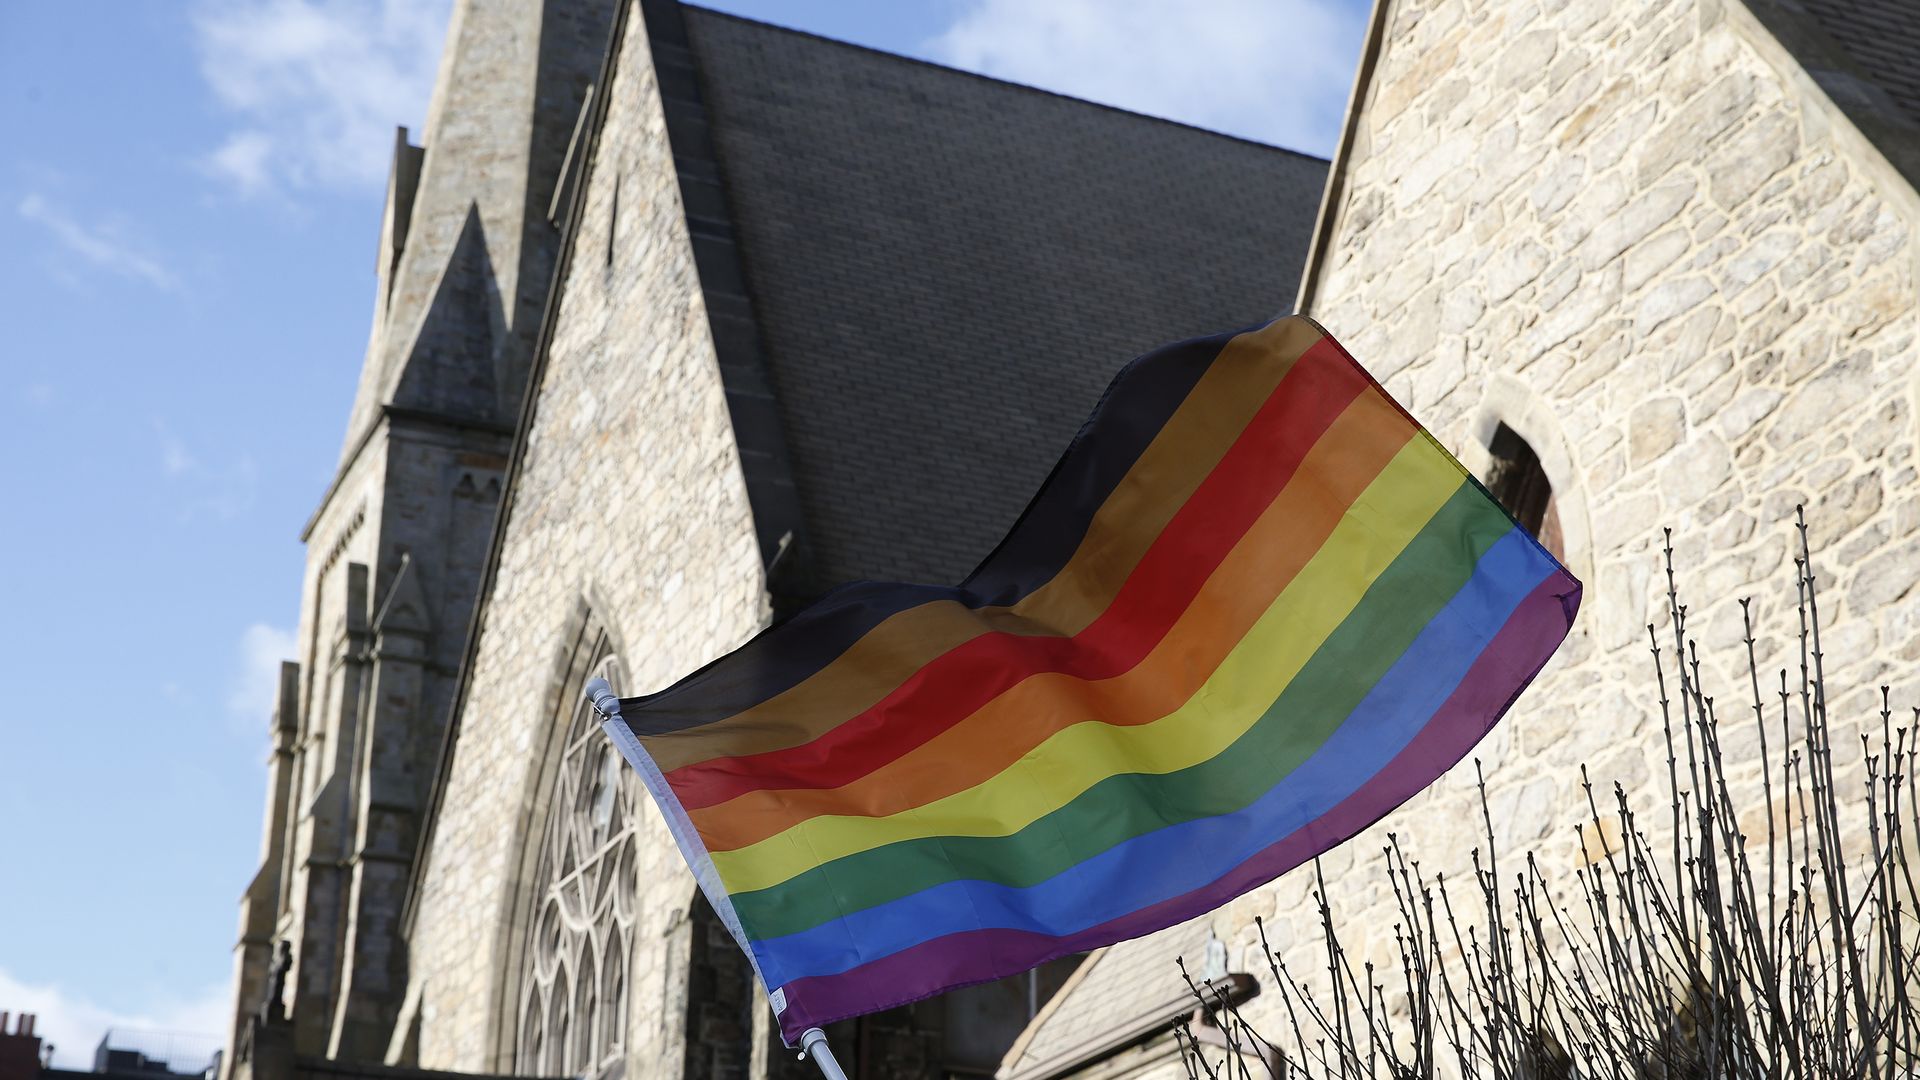 In this image, an LGBTQ pride flag waves in front of a church.